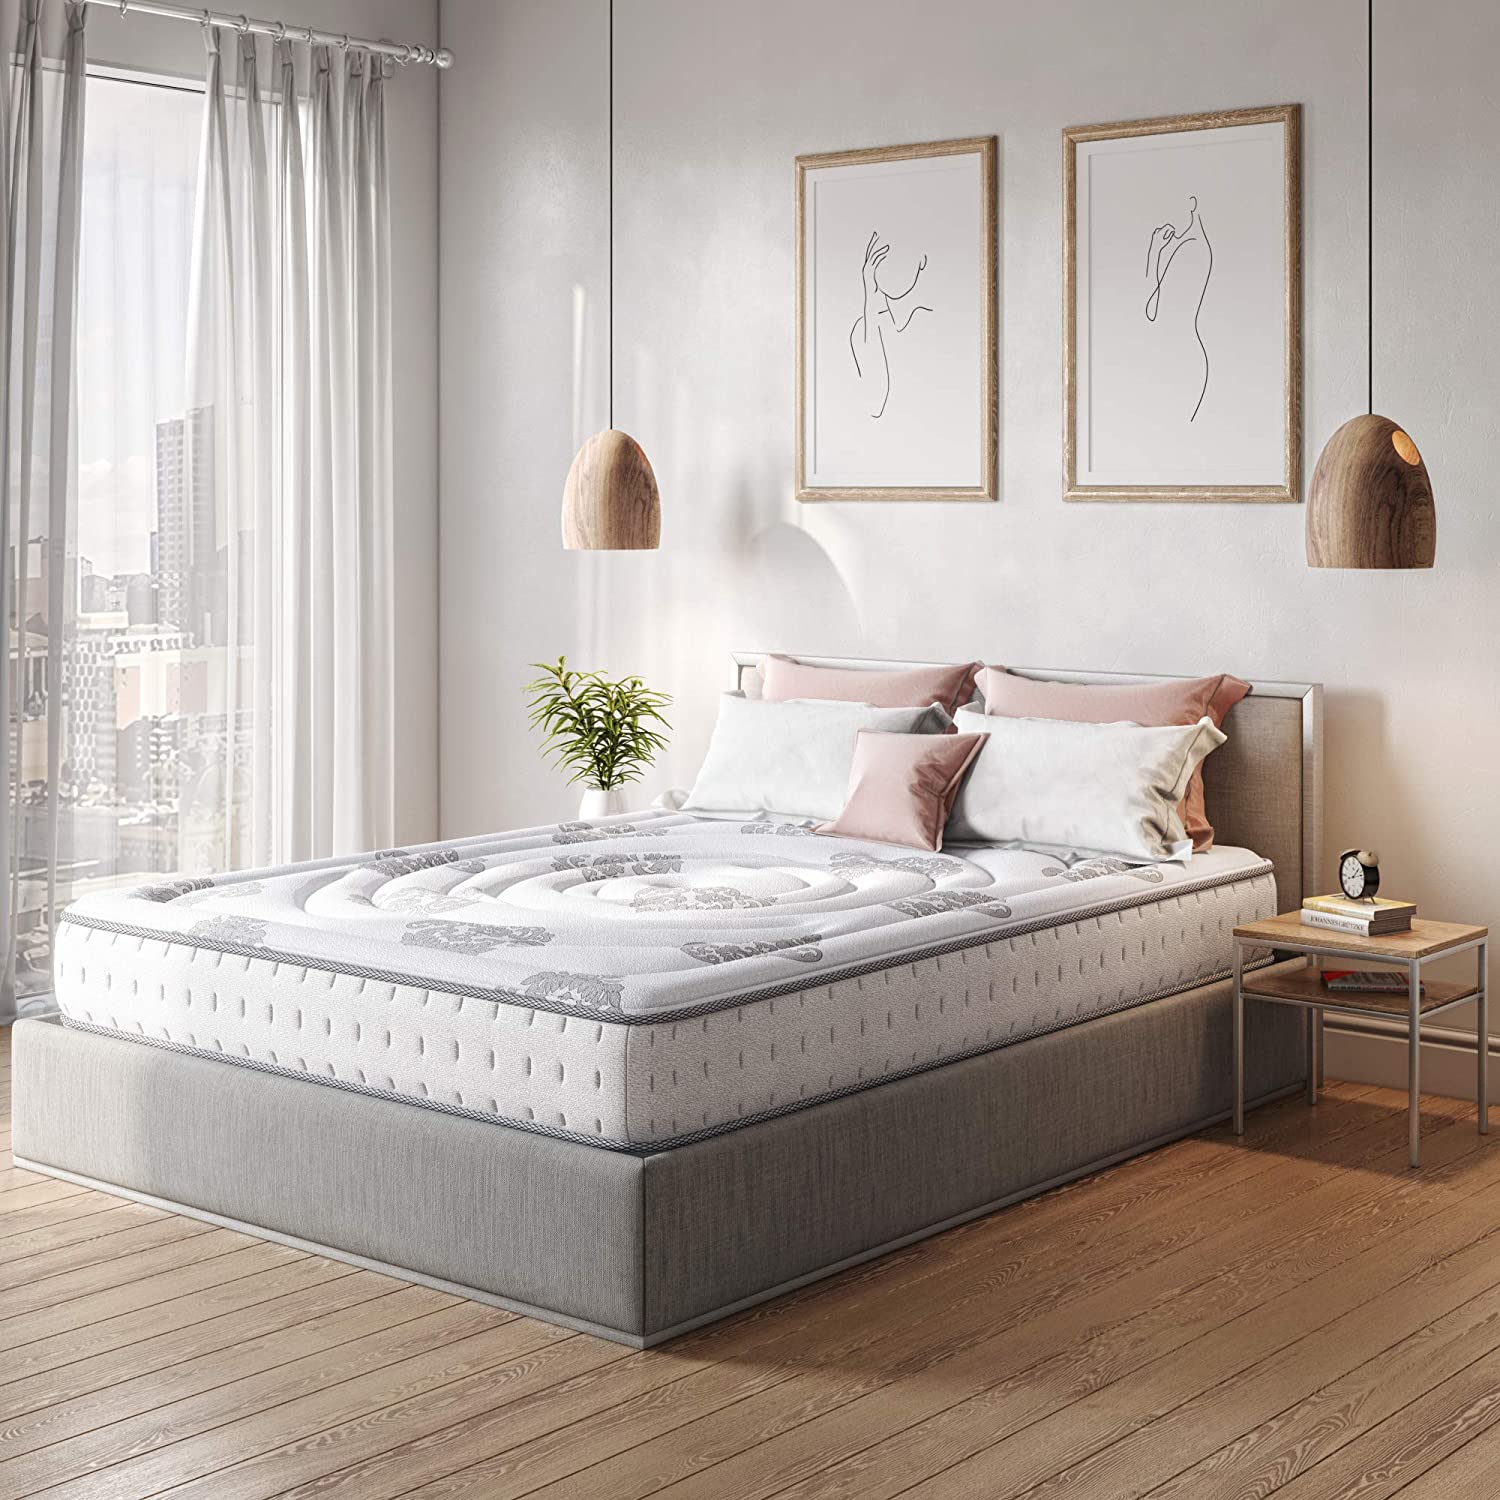 Best Hybrid Mattress 2020 Review & Buying Guide